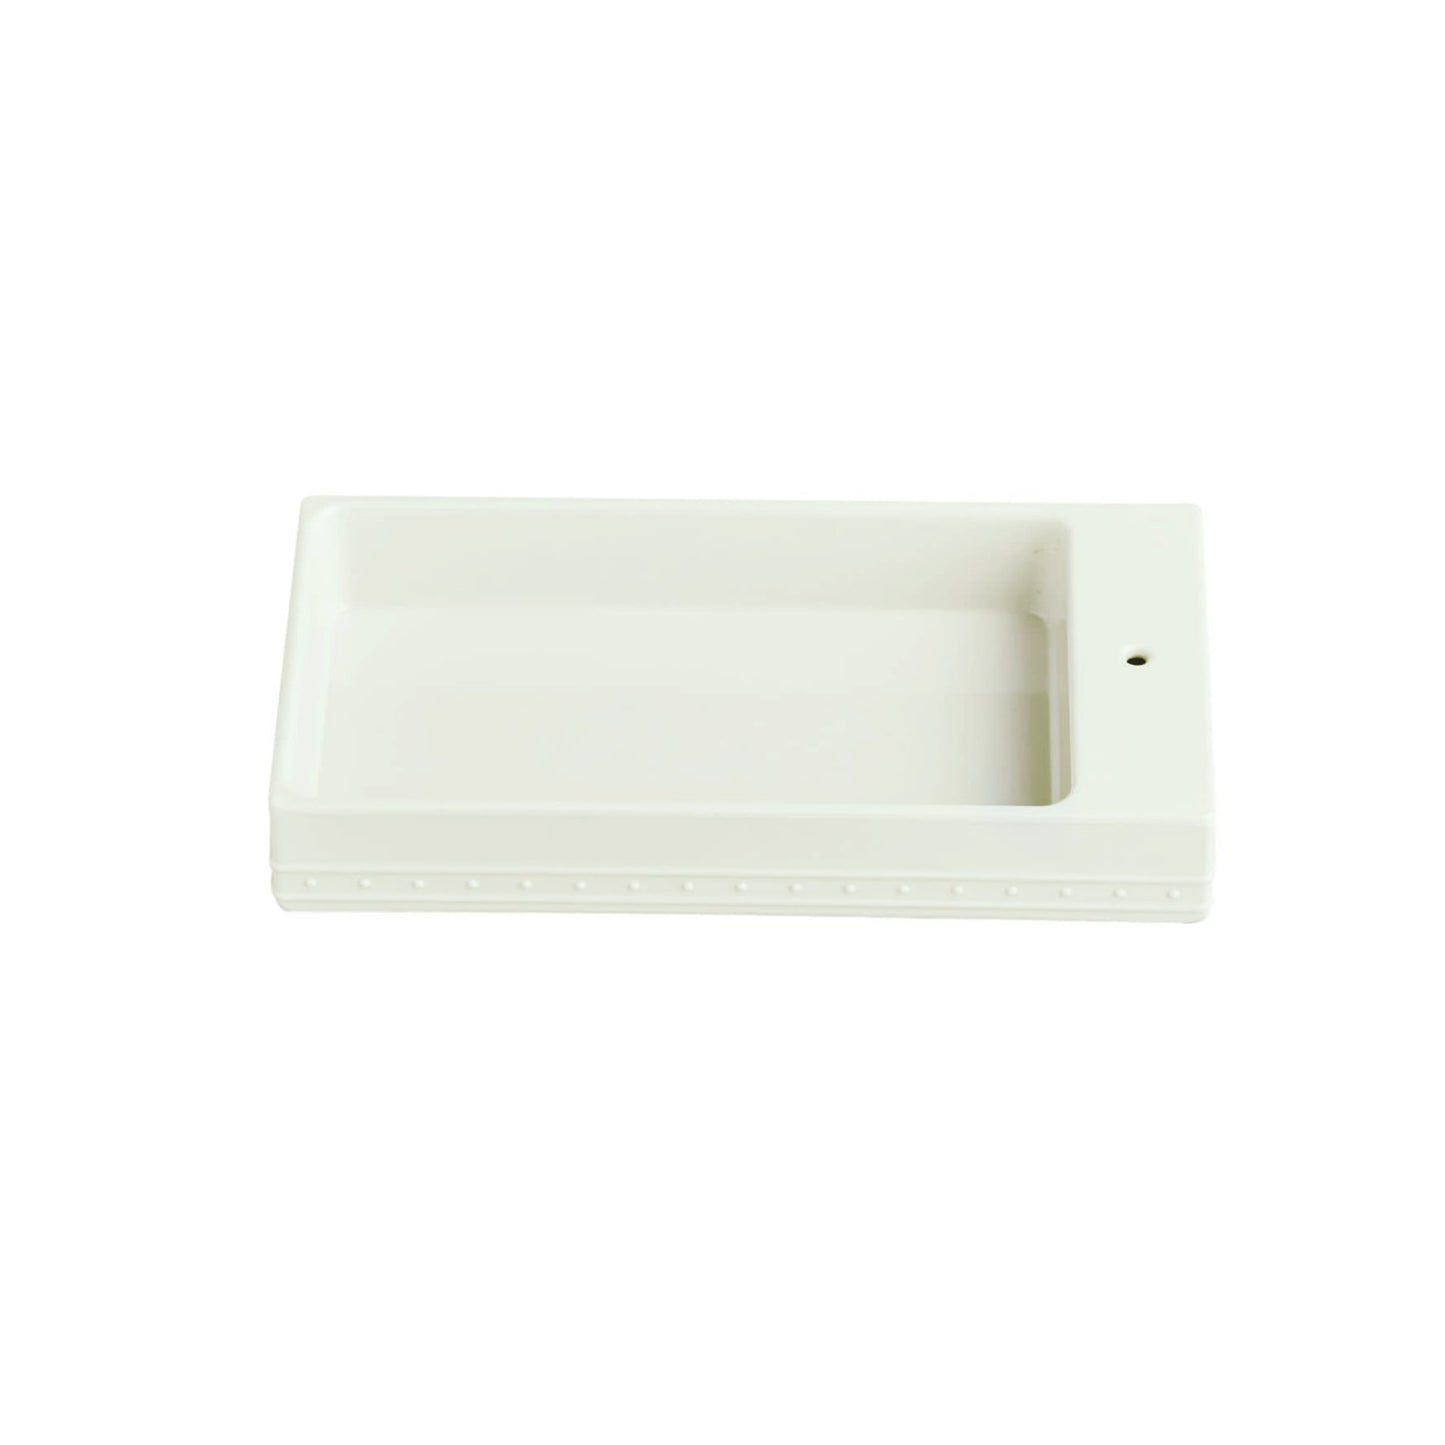 Melamine Guest Towel Holder by Nora Fleming  Nora Fleming   